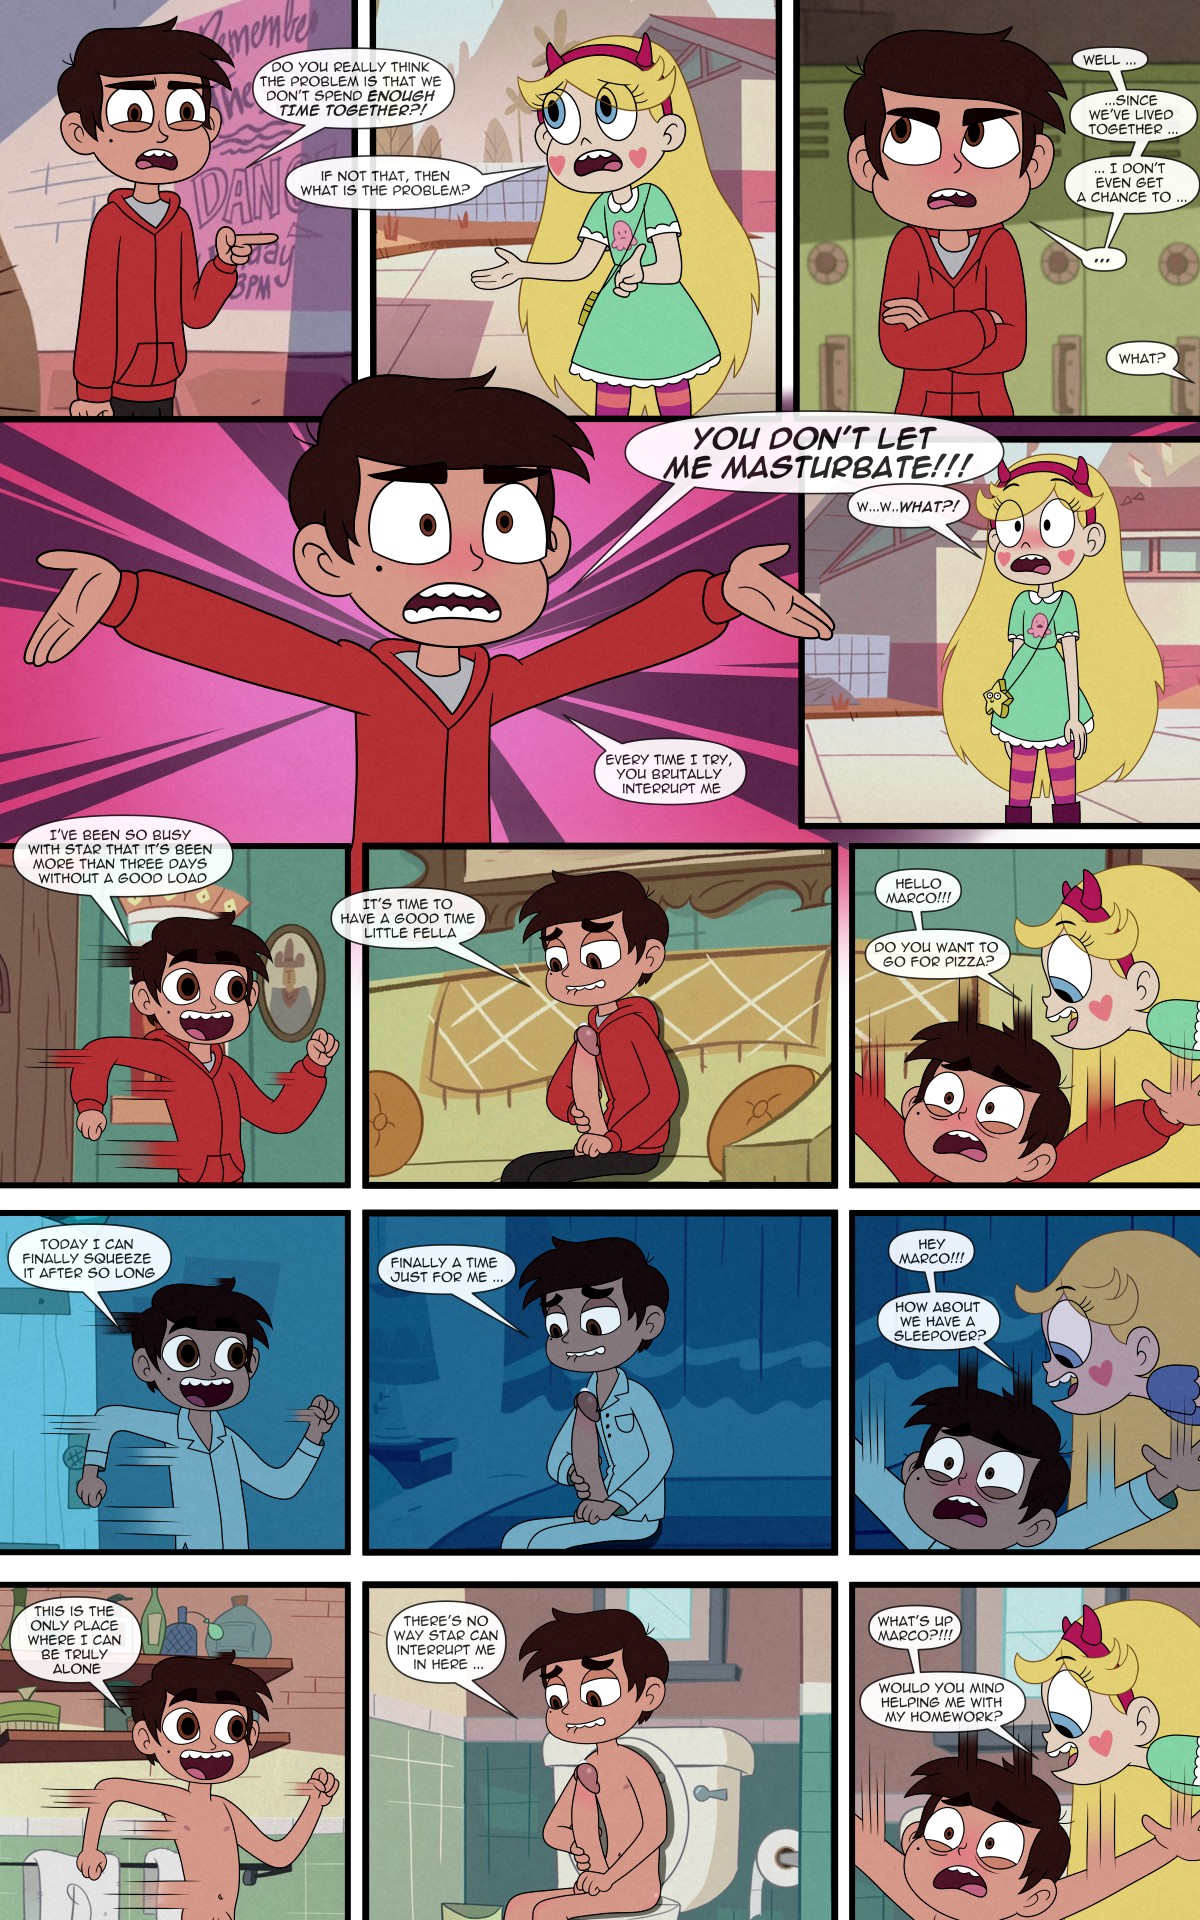 Time Together Star Vs The Forces Of Evil 05